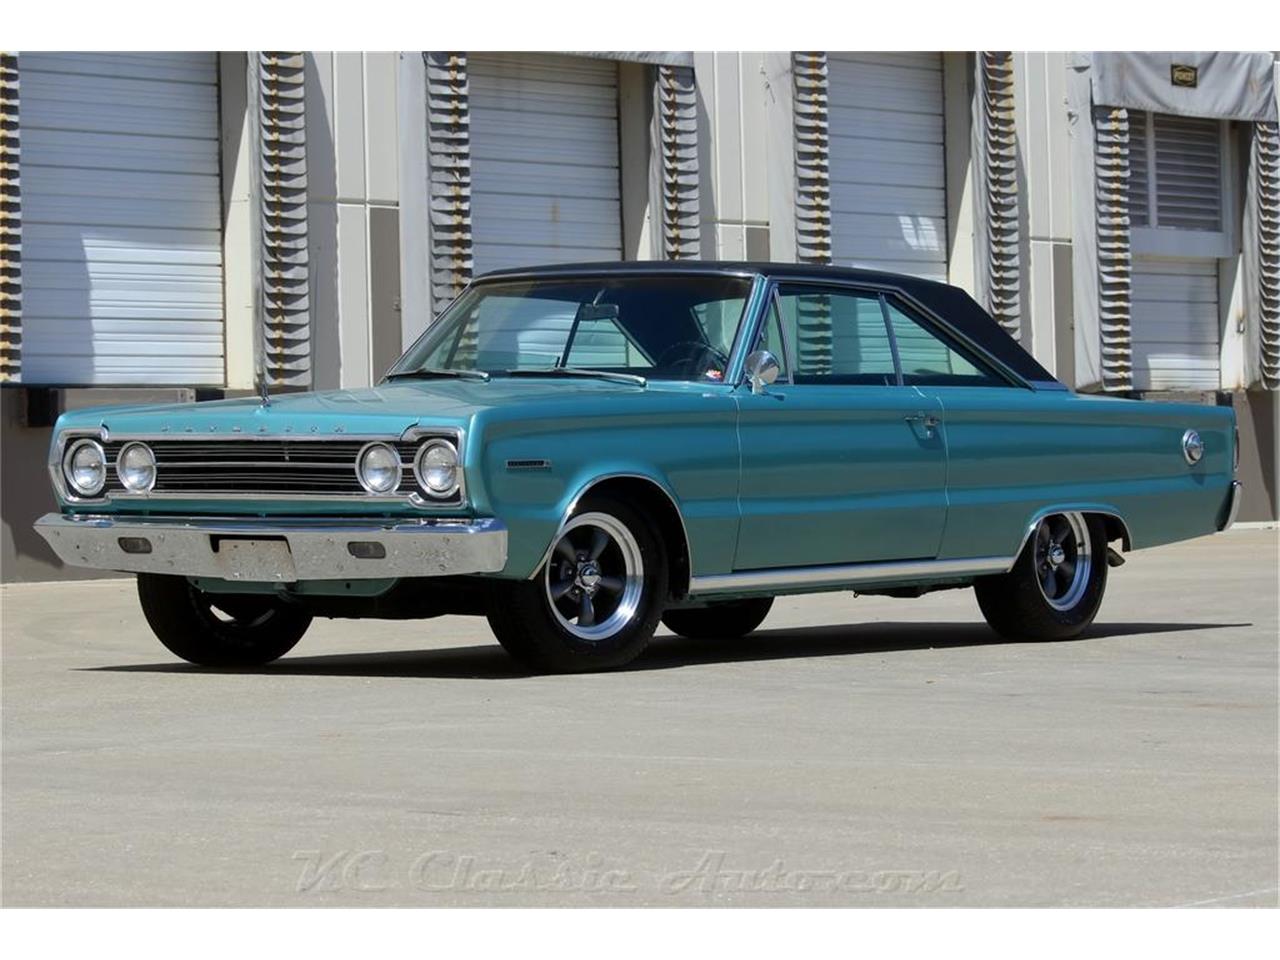 This 1967 Belvedere II HEMI Is a Ghost: The One-Off 426-Cube V8